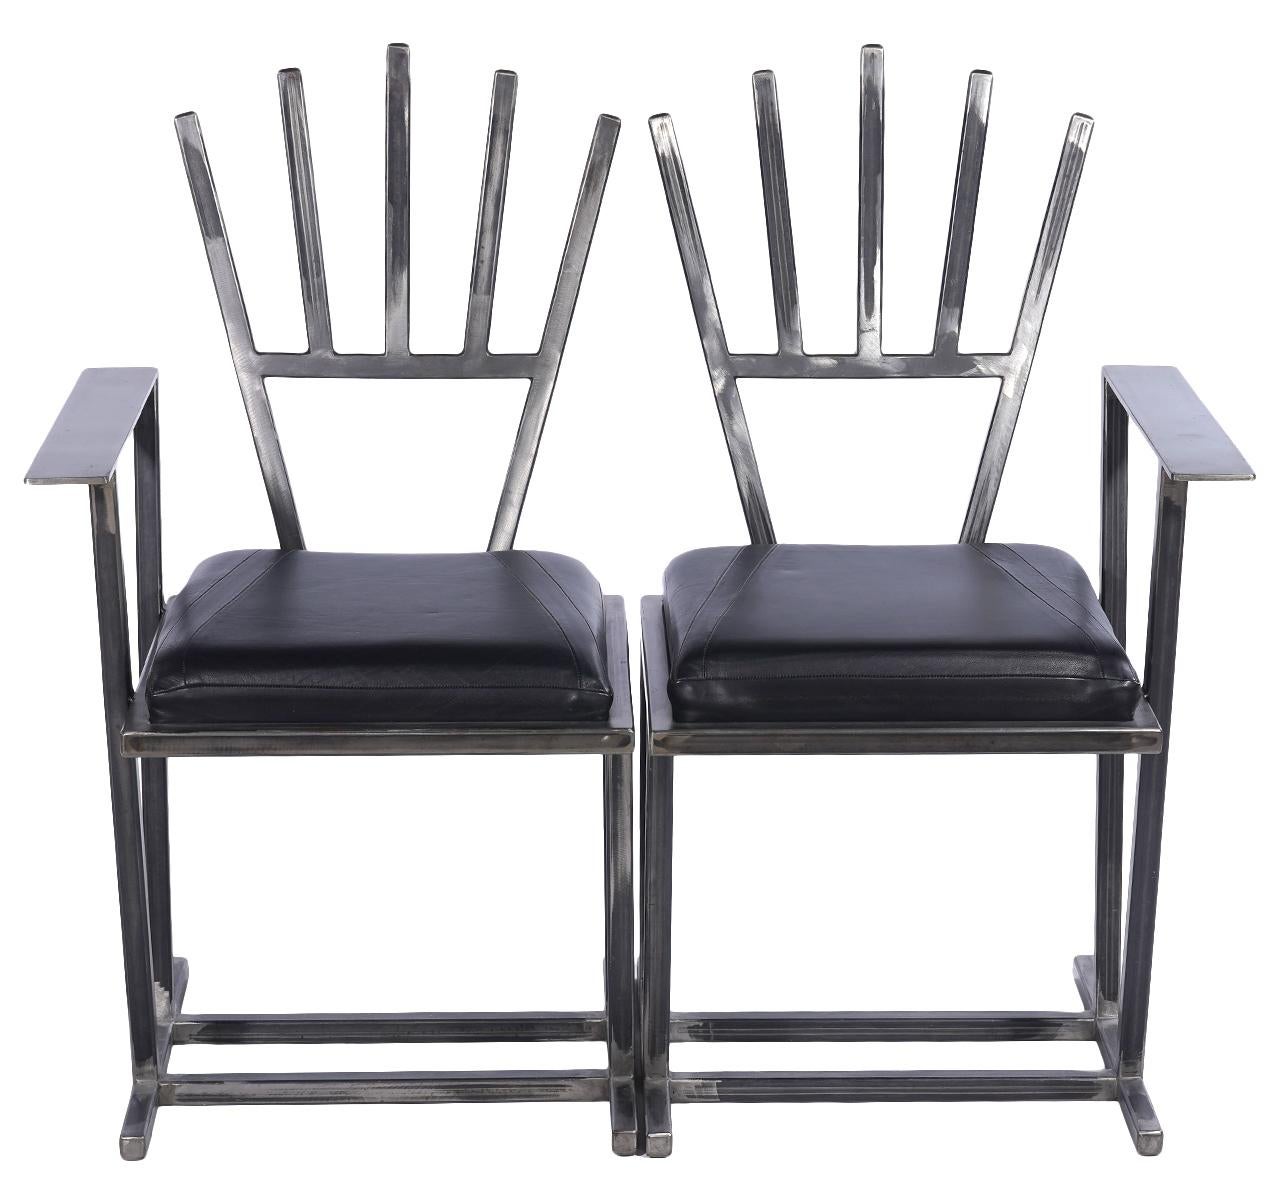 Gary Kulak, American (Born 1952). Set of 8 single arm chairs that fit into sets of two. Handmade steel chairs with leather seats. Measures: 38.5